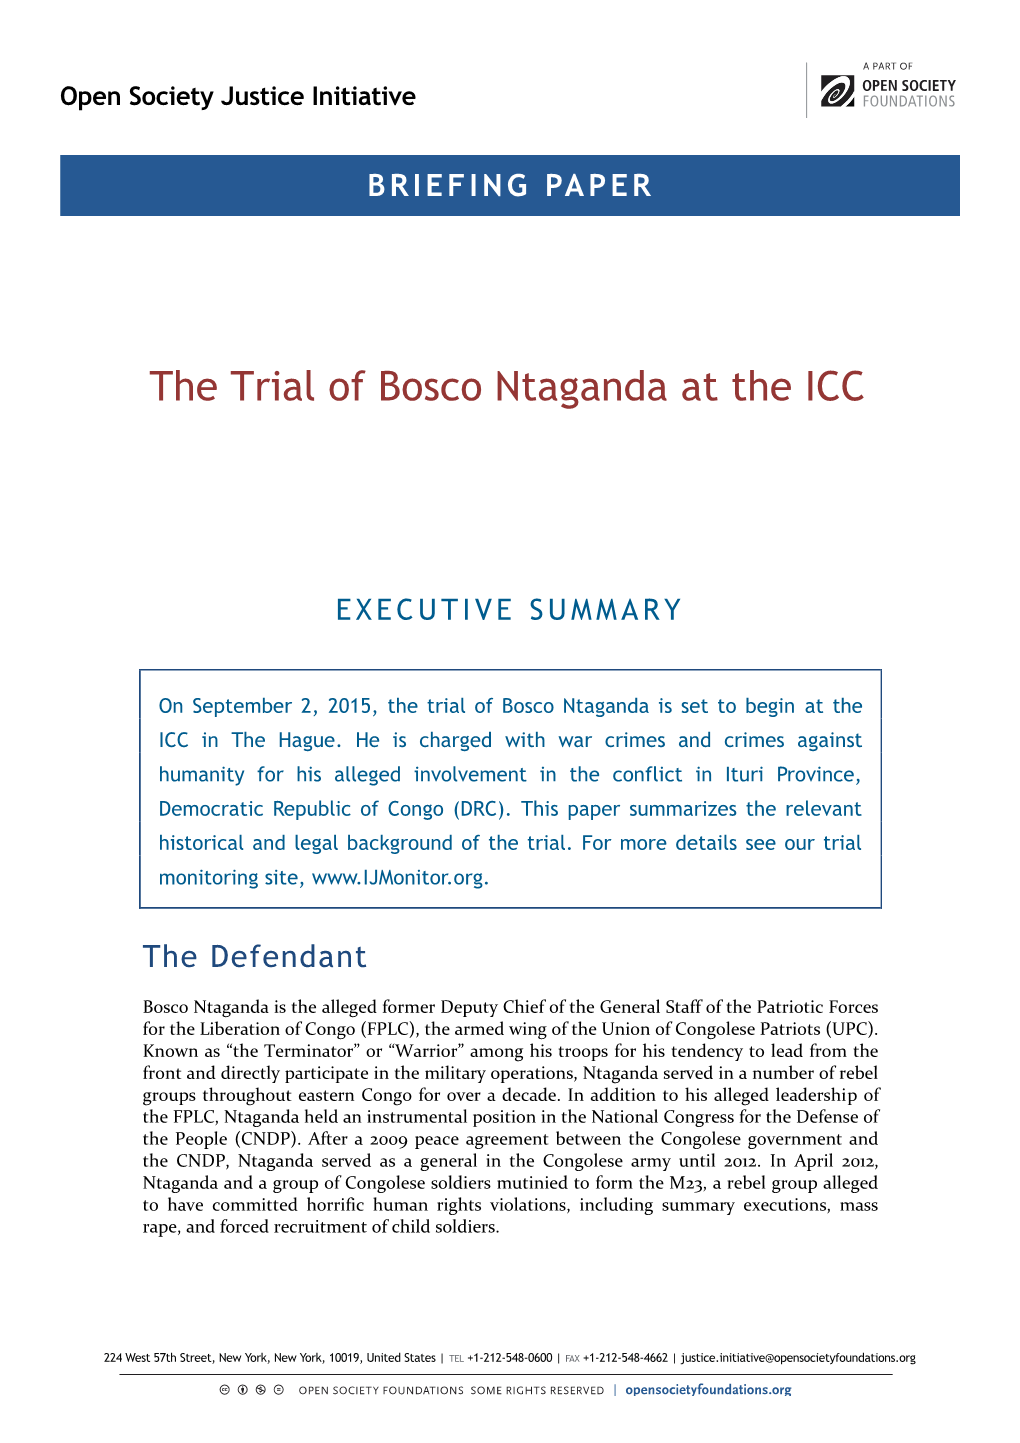 The Trial of Bosco Ntaganda at the ICC